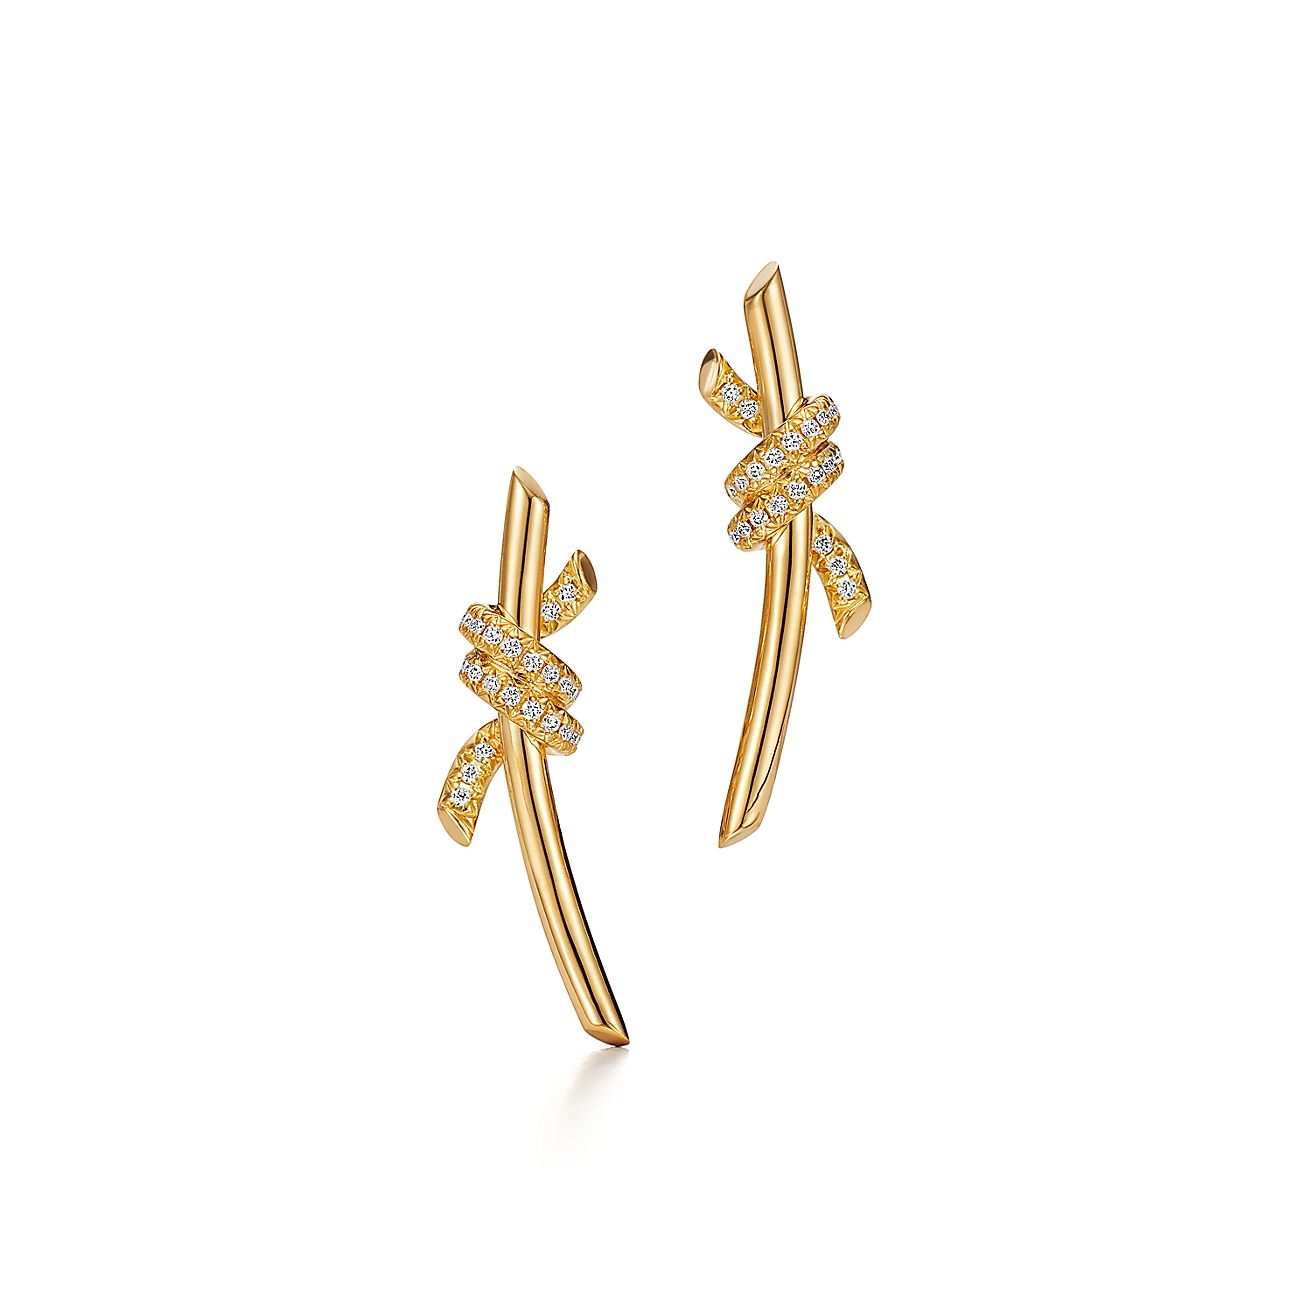 Bree Bow Earrings Stunning statement earrings, stainless steel snake chain  bows plated in gold will make you the envy of all your… | Instagram